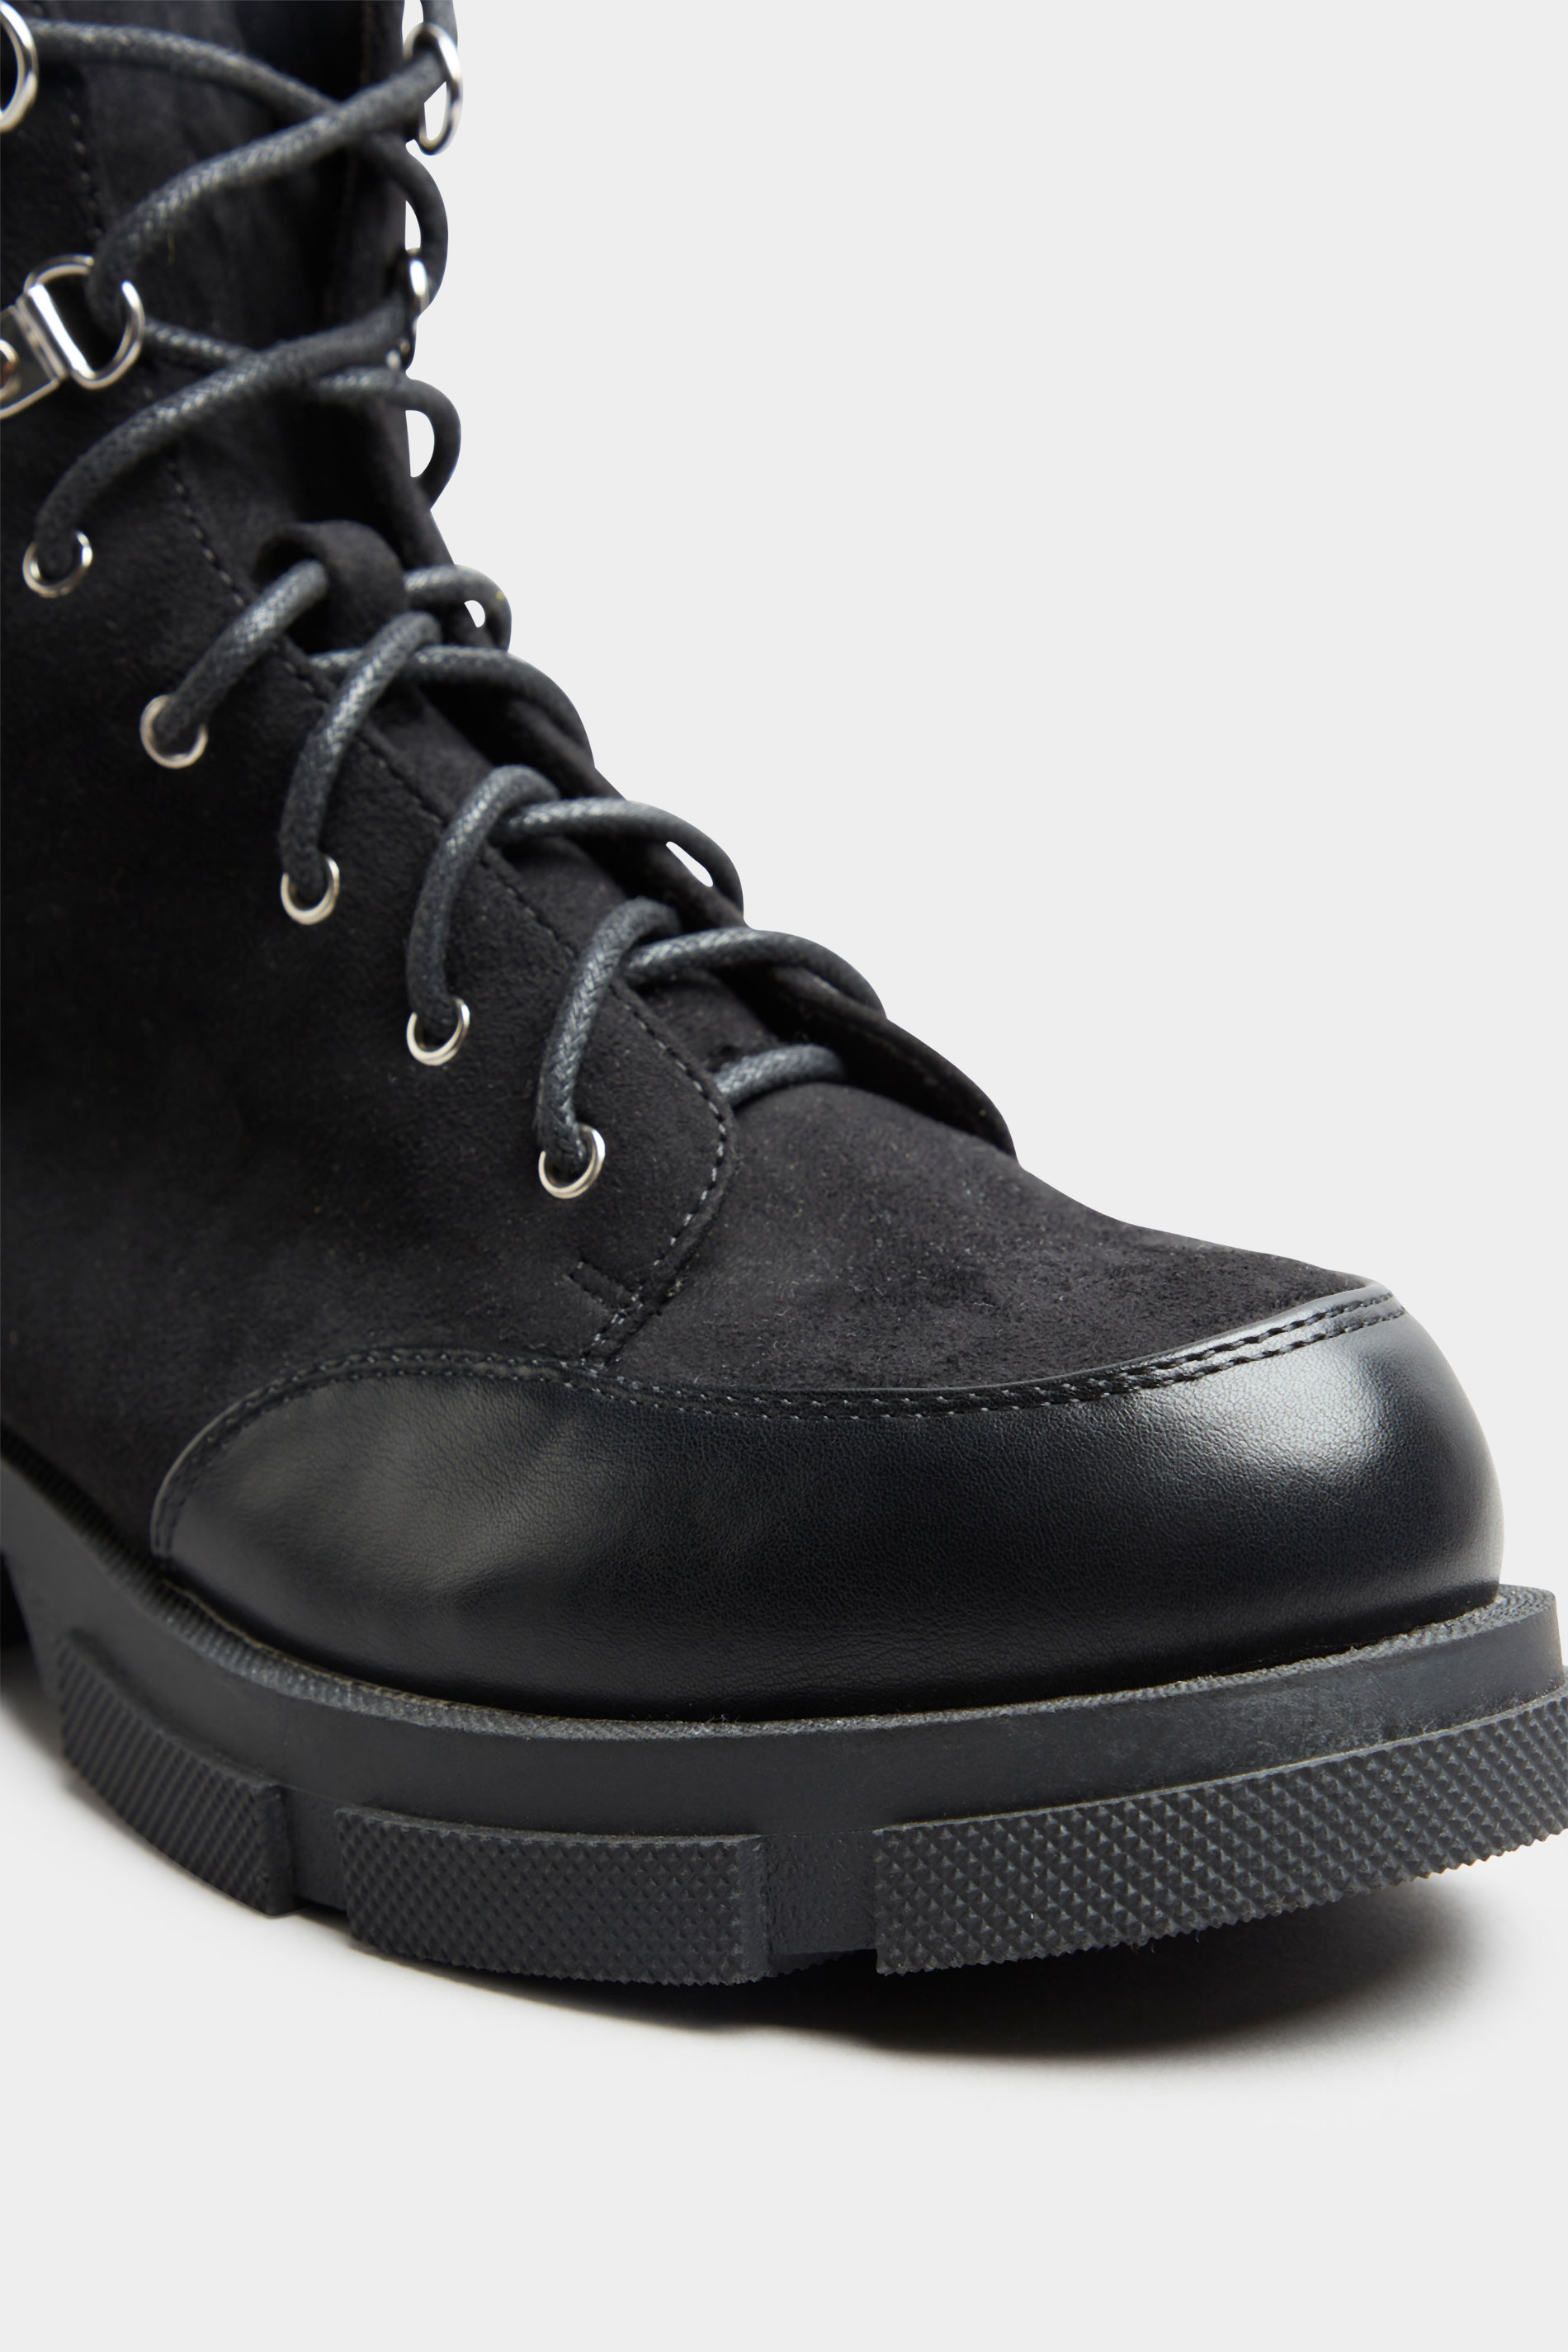 LIMITED COLLECTION Black Faux Suede & Leather Lace Up Boots In Wide Fit | Yours Clothing 3